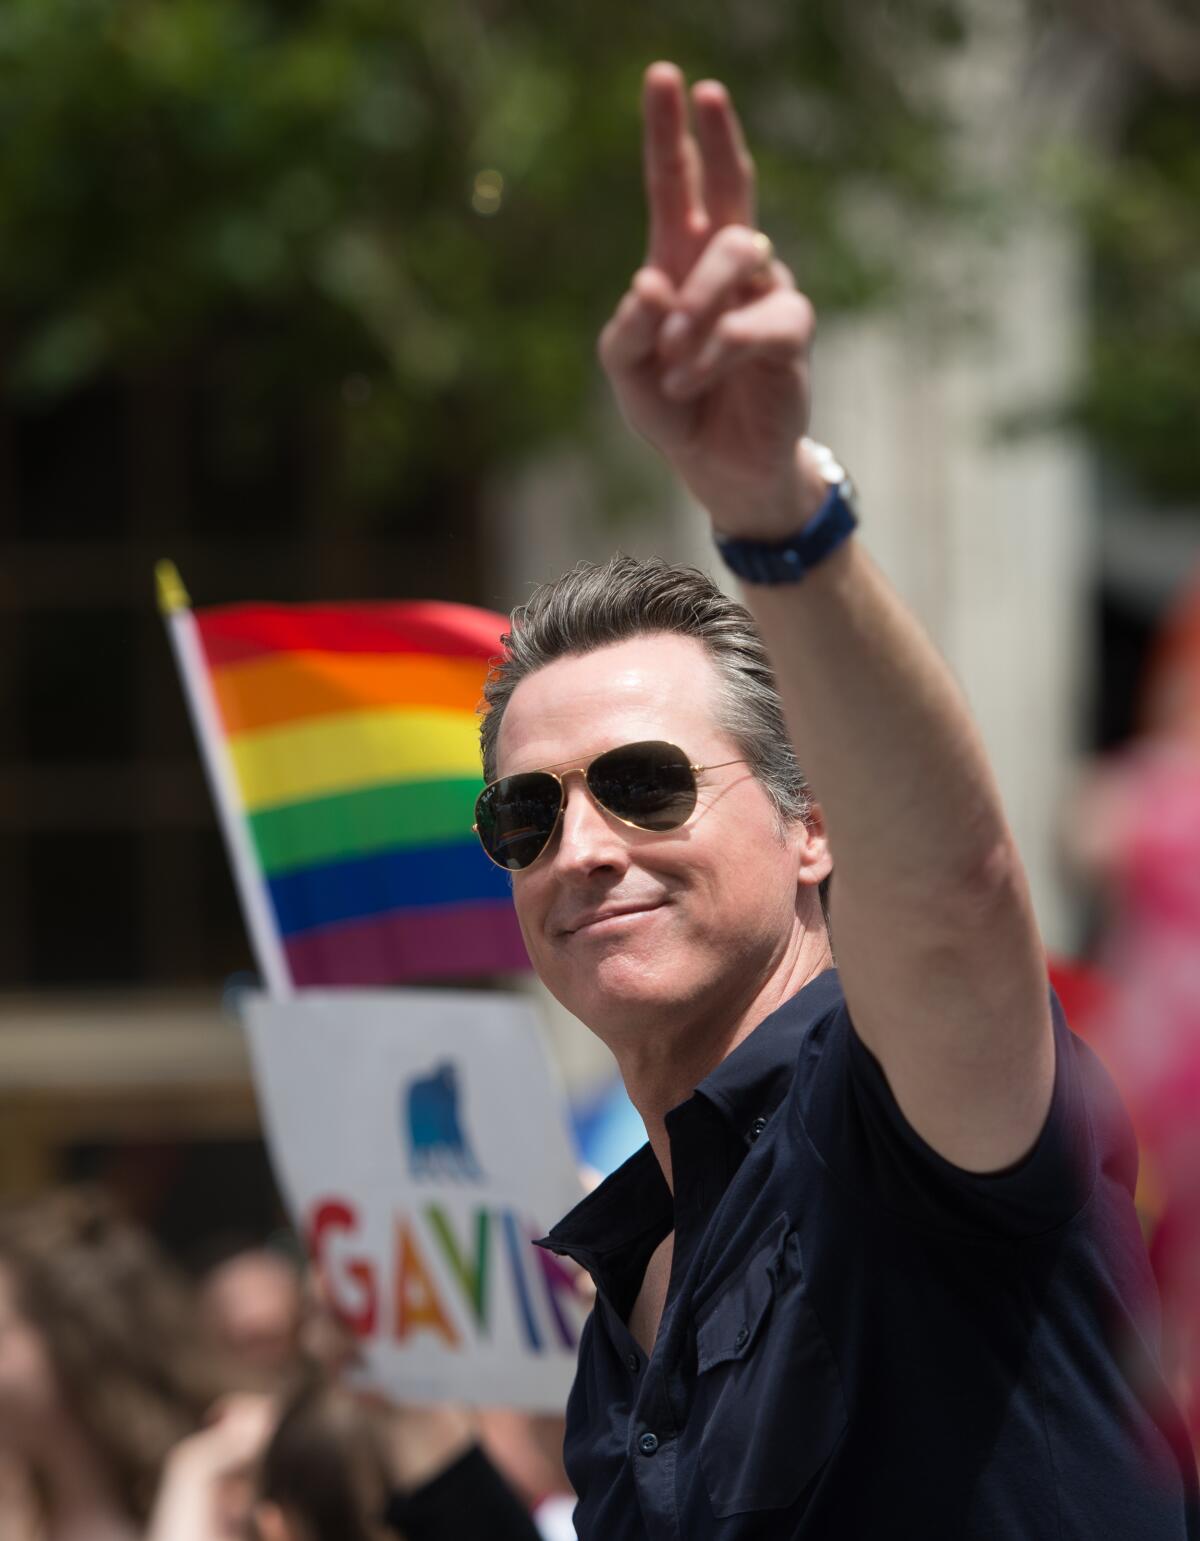 Gavin Newsom waves to a crowd during the San Francisco Pride parade in 2017.